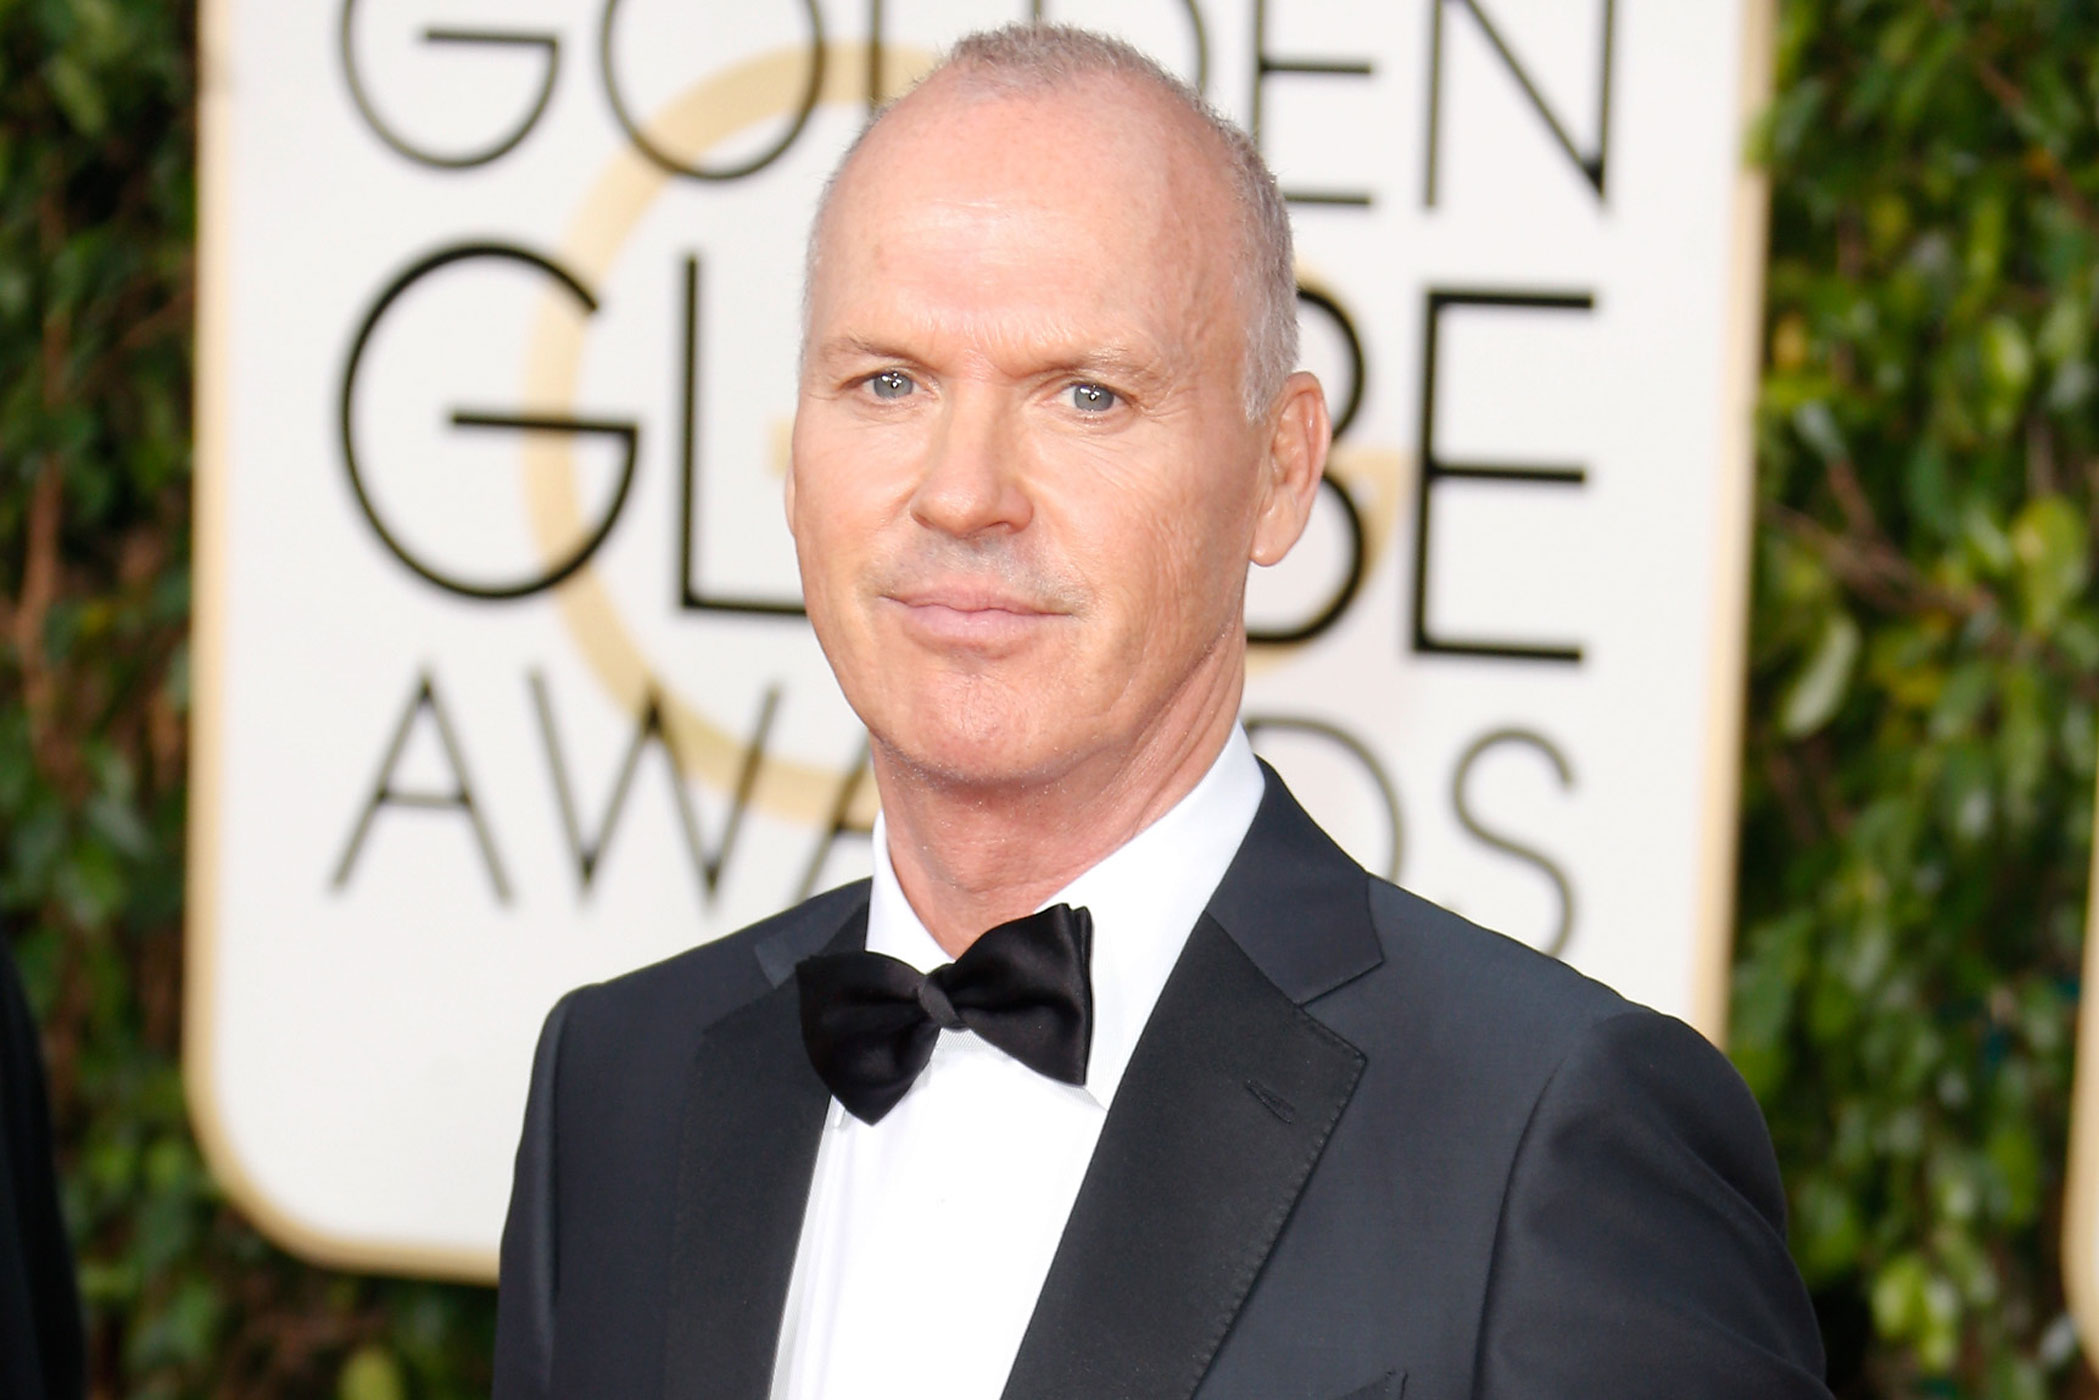 Michael Keaton attends the 72nd Annual Golden Globe Awards at The Beverly Hilton Hotel on Jan. 11, 2015 in Beverly Hills, Calif. (Jeff Vespa—WireImage/Getty Images)